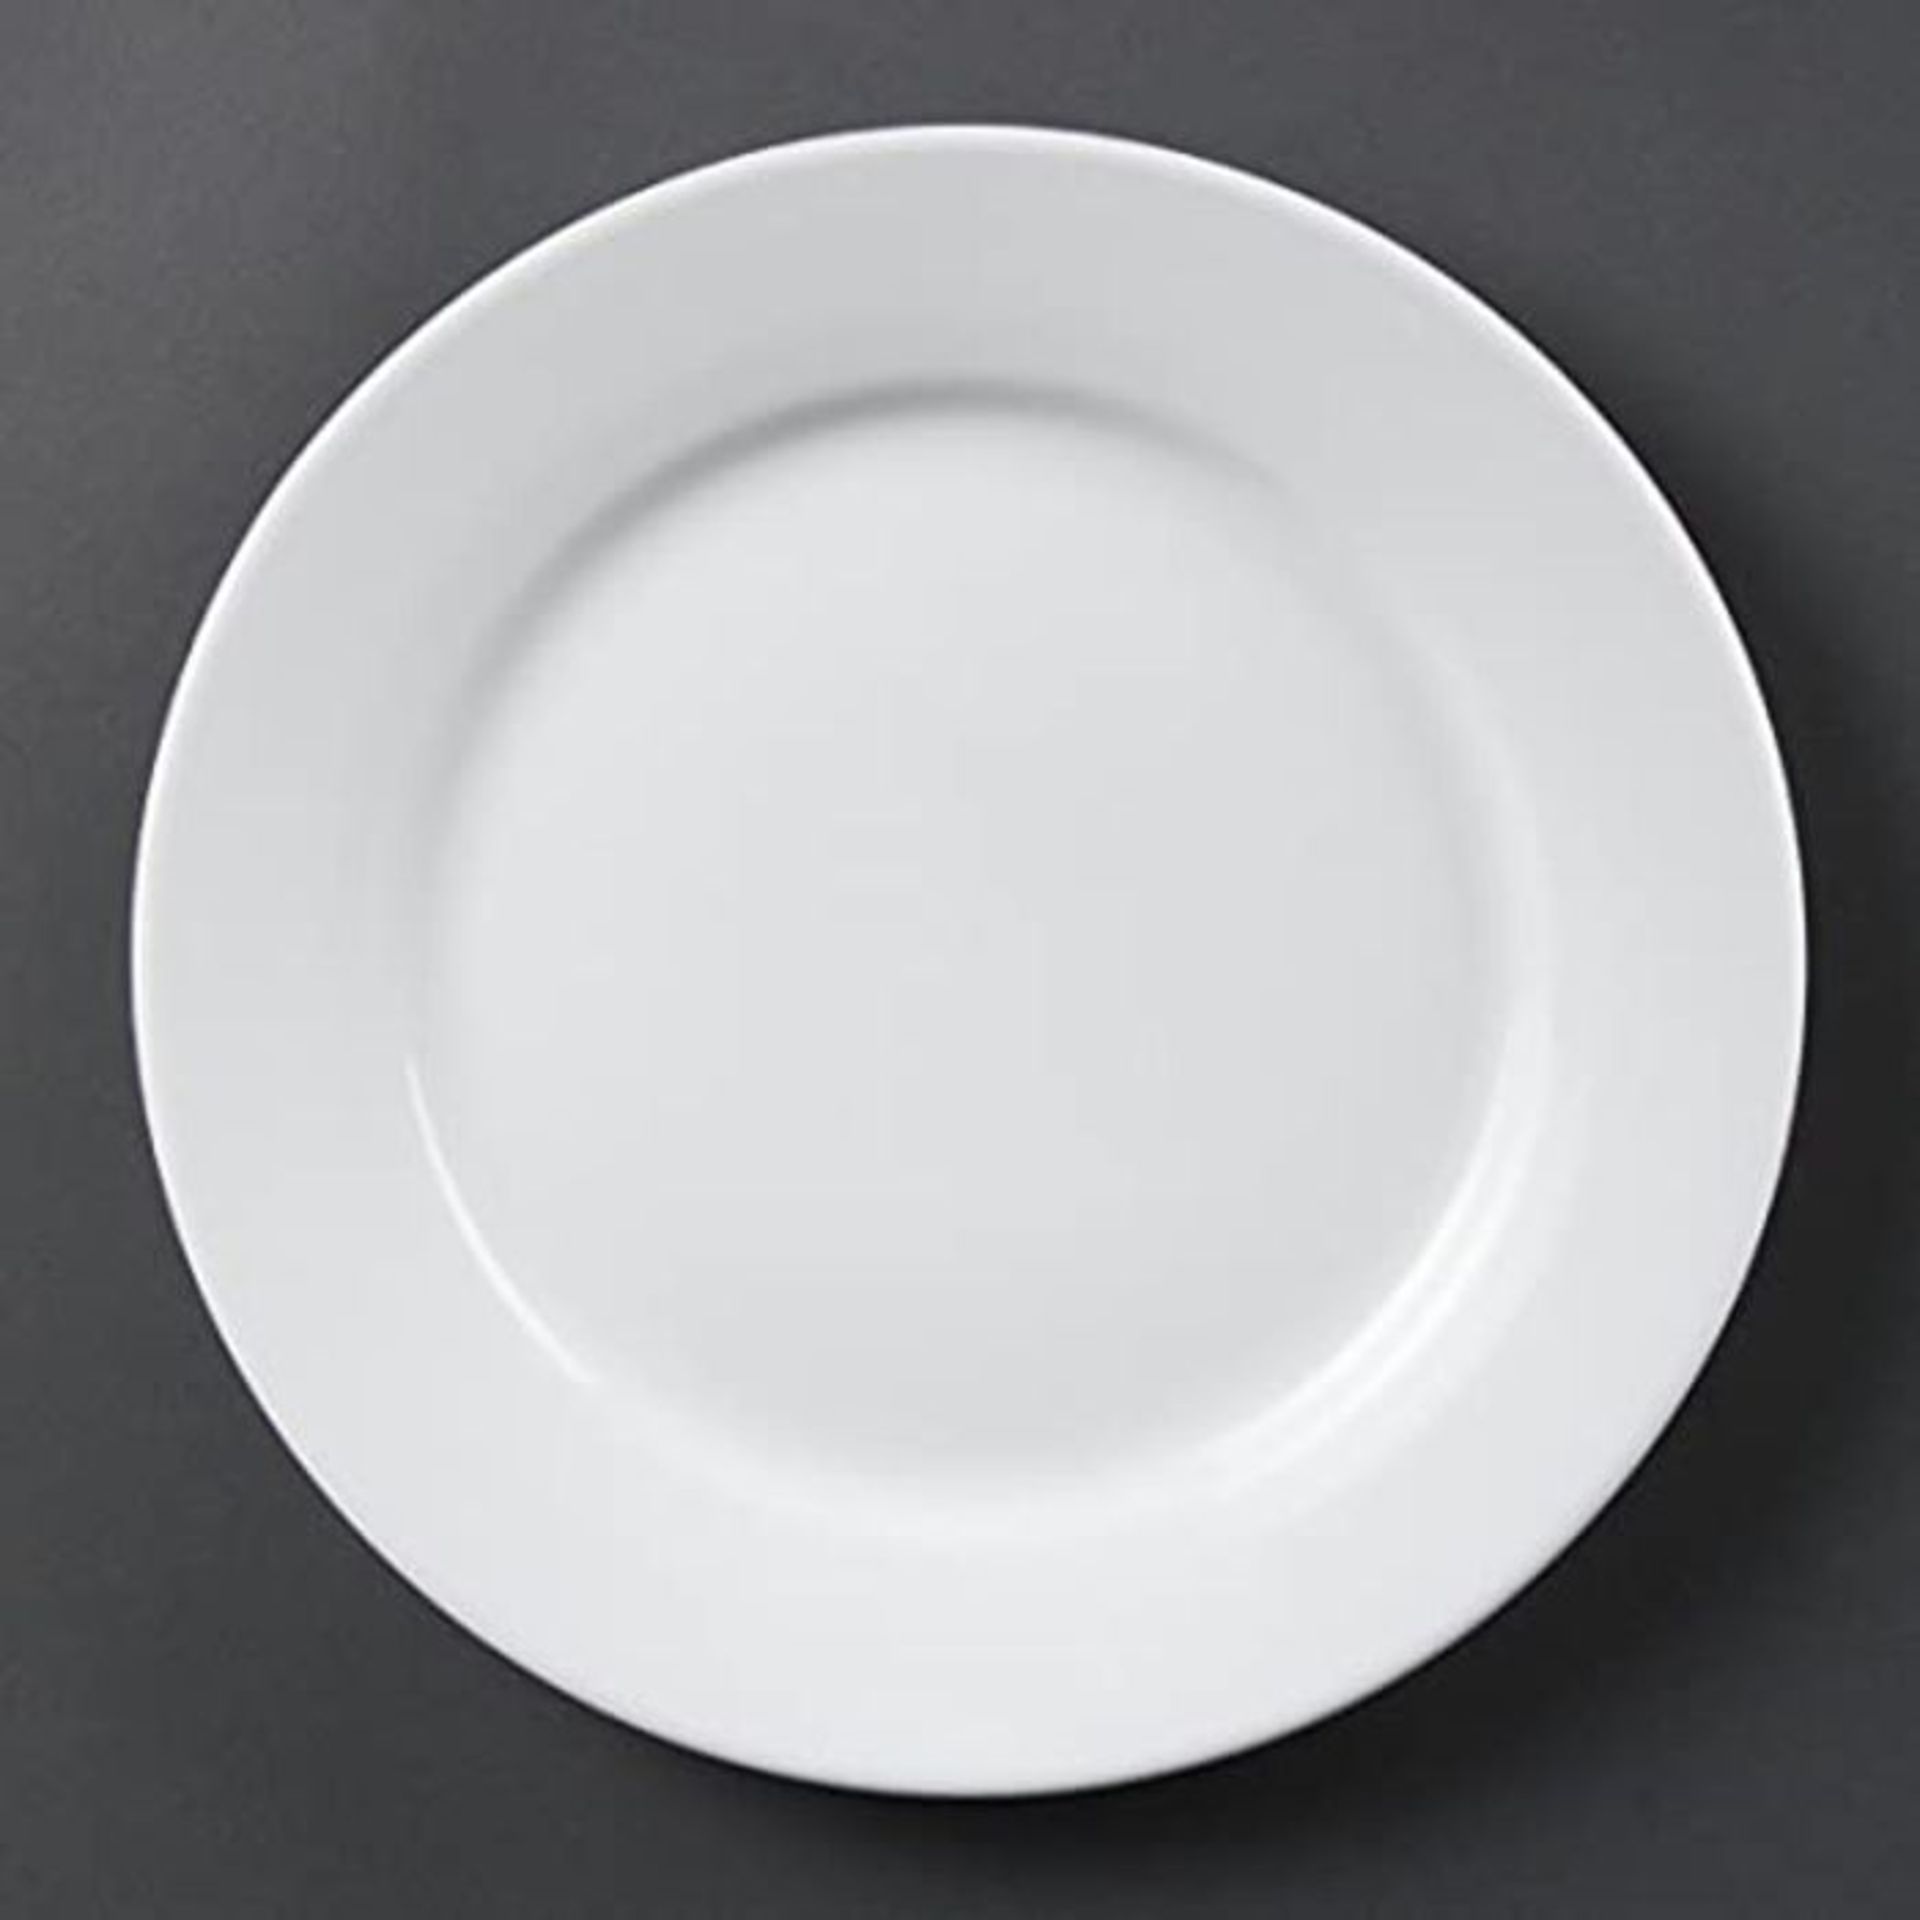 [CRACKED] Olympia White Ware Wide Rimmed Service Plates 250mm Porcelain Innovative 12p